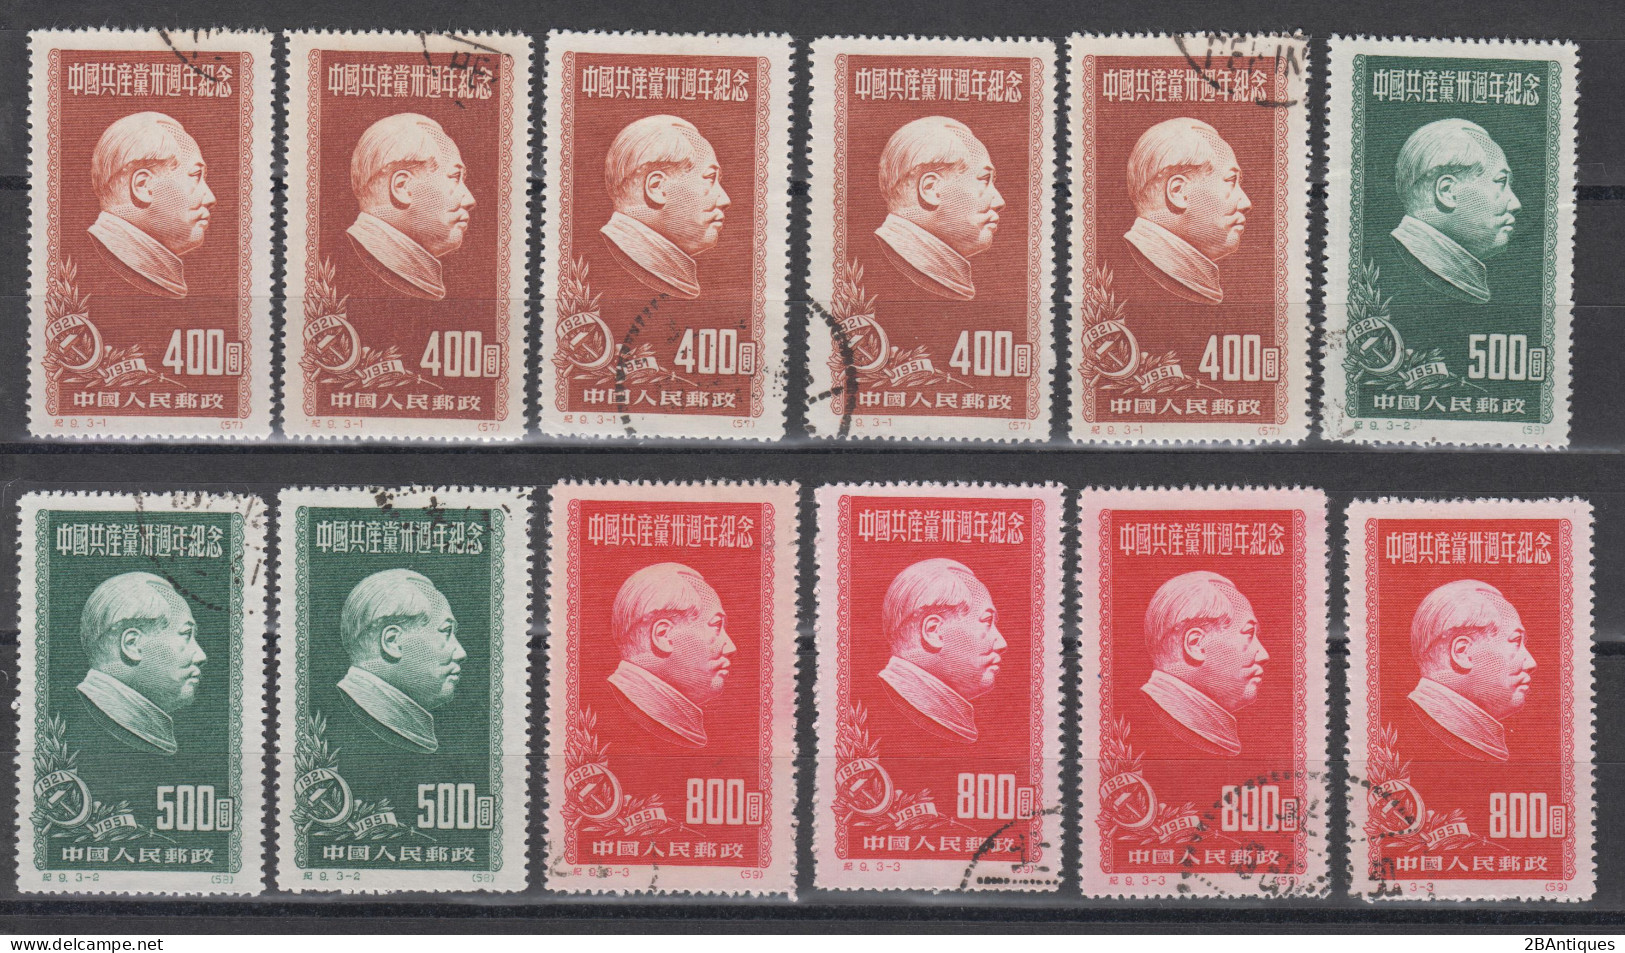 PR CHINA 1951 - The 30th Anniversary Of The Communist Party Of China - Mao Zedong CTO 12 Stamps - Oblitérés